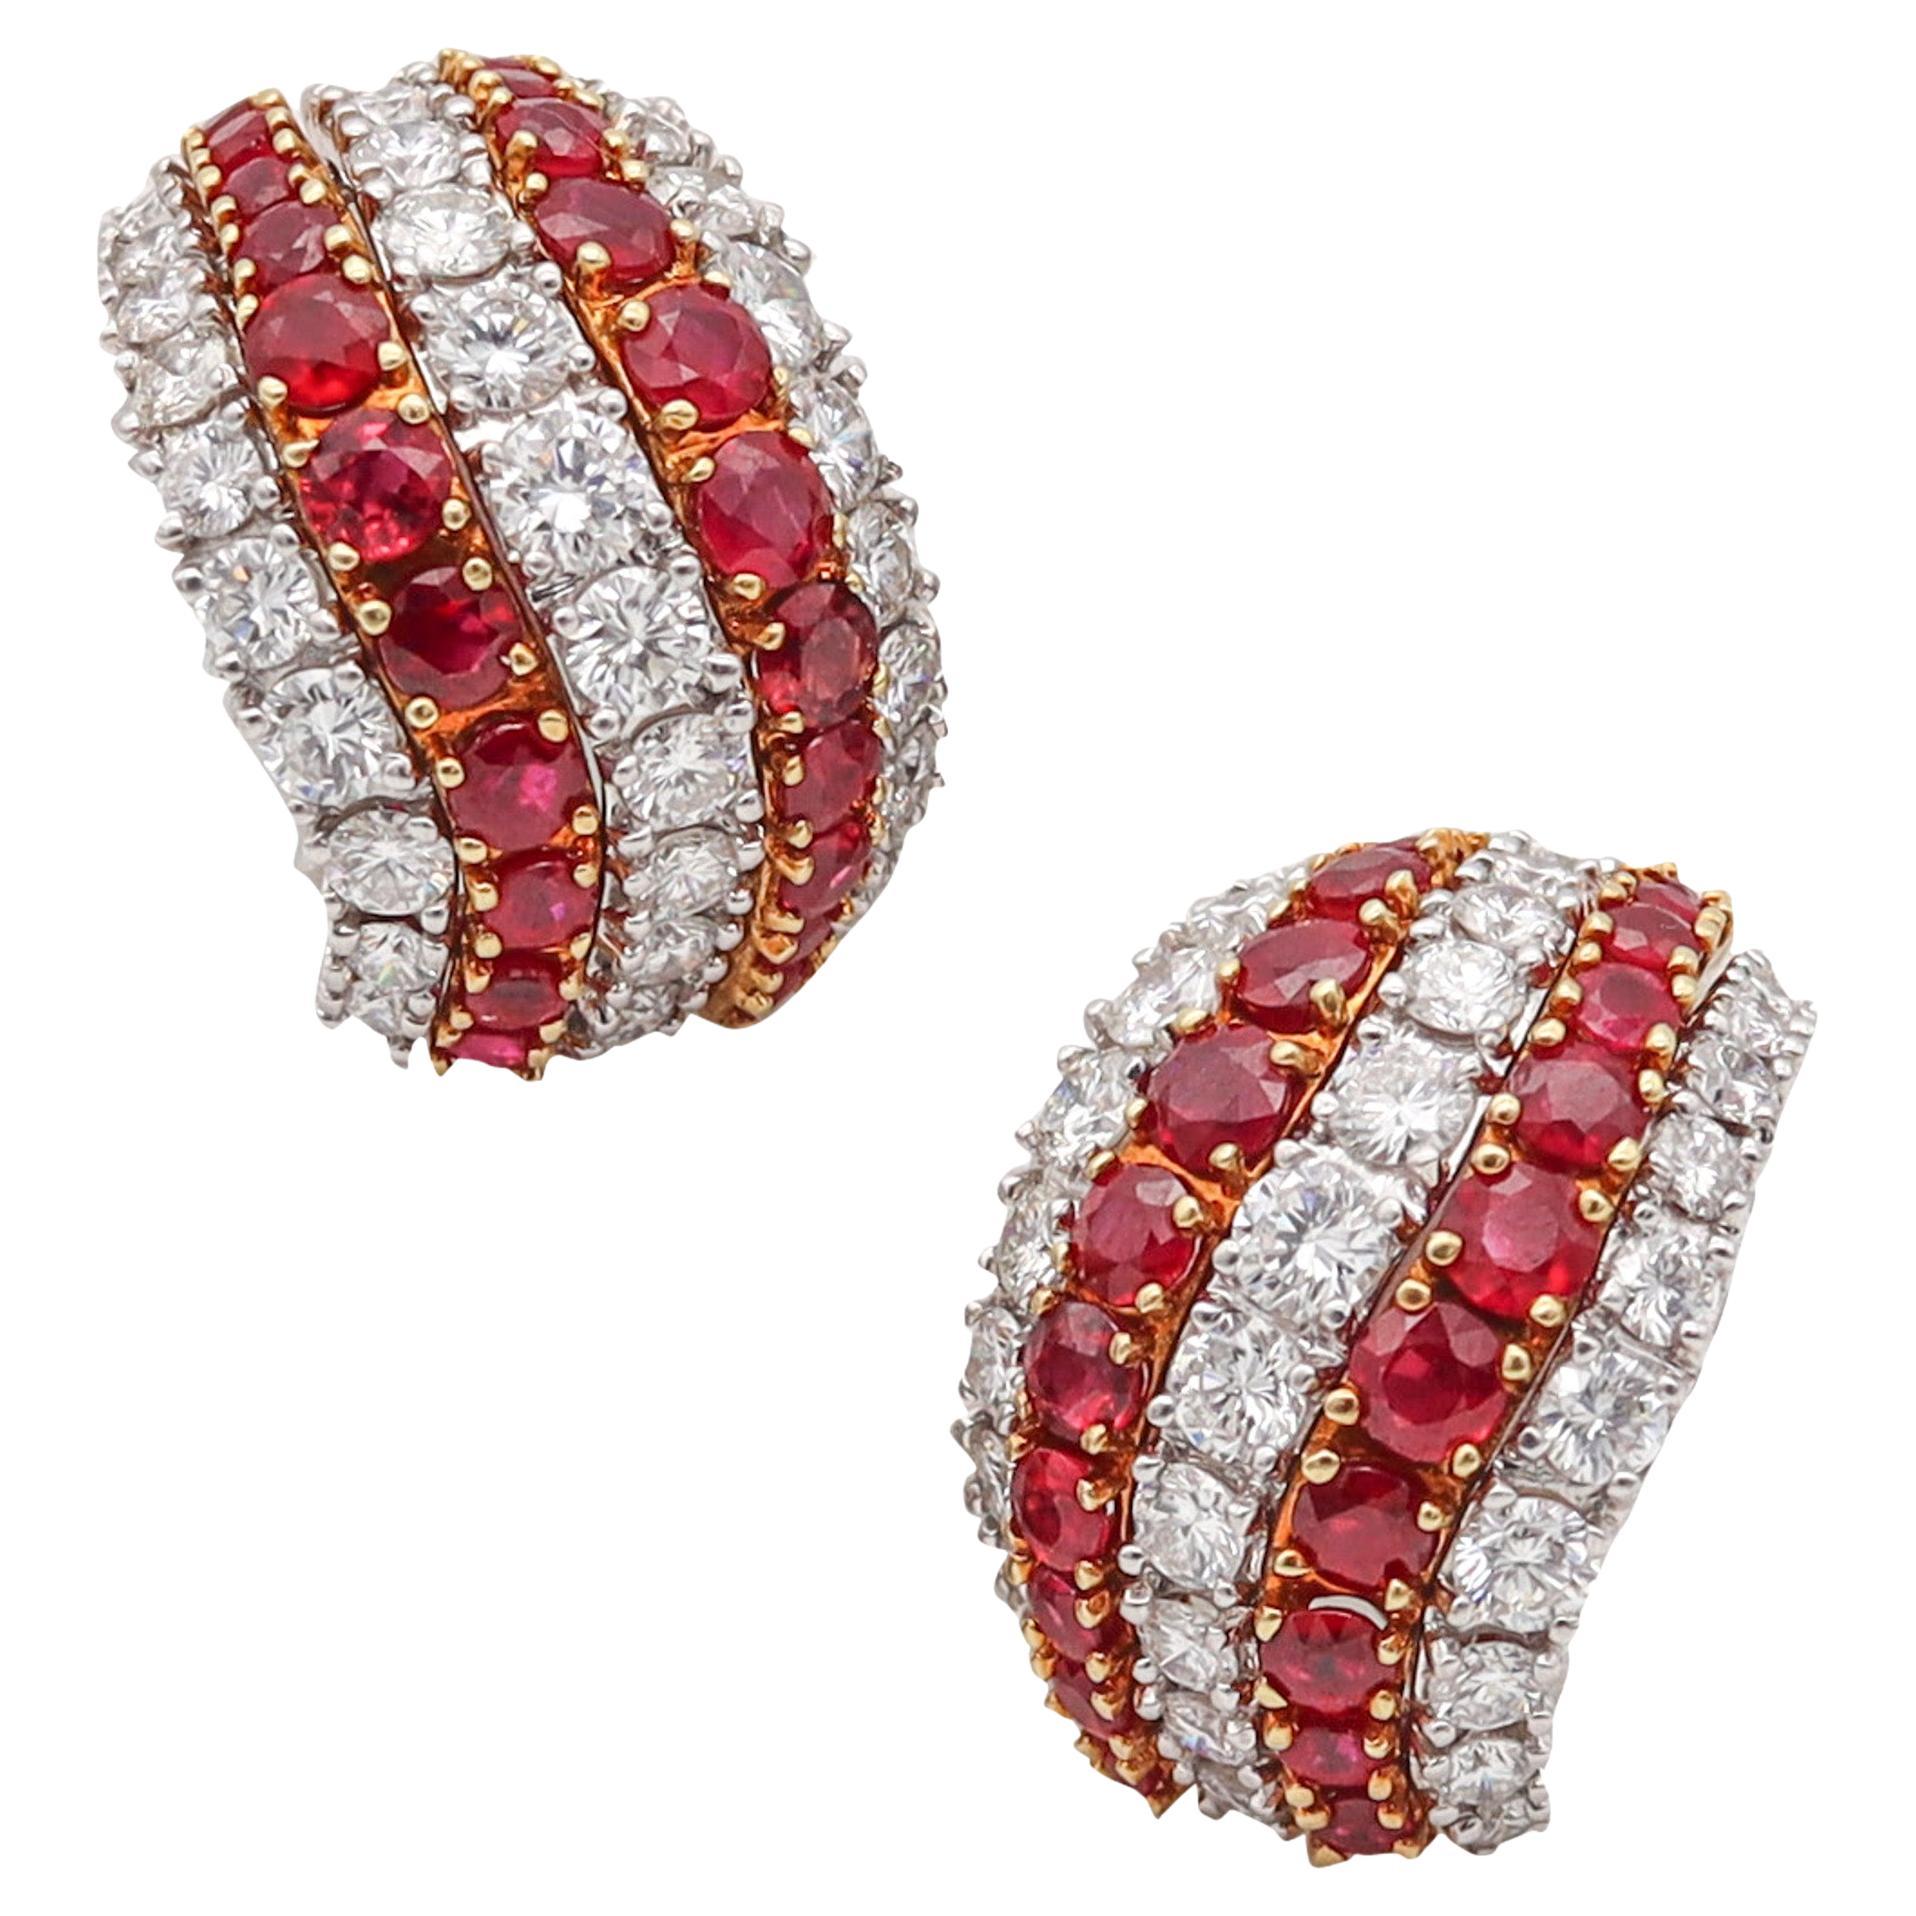 Kutchinsky 1970 Clip Earrings 18Kt Gold Platinum And 21.02 Ctw Diamonds & Rubies For Sale